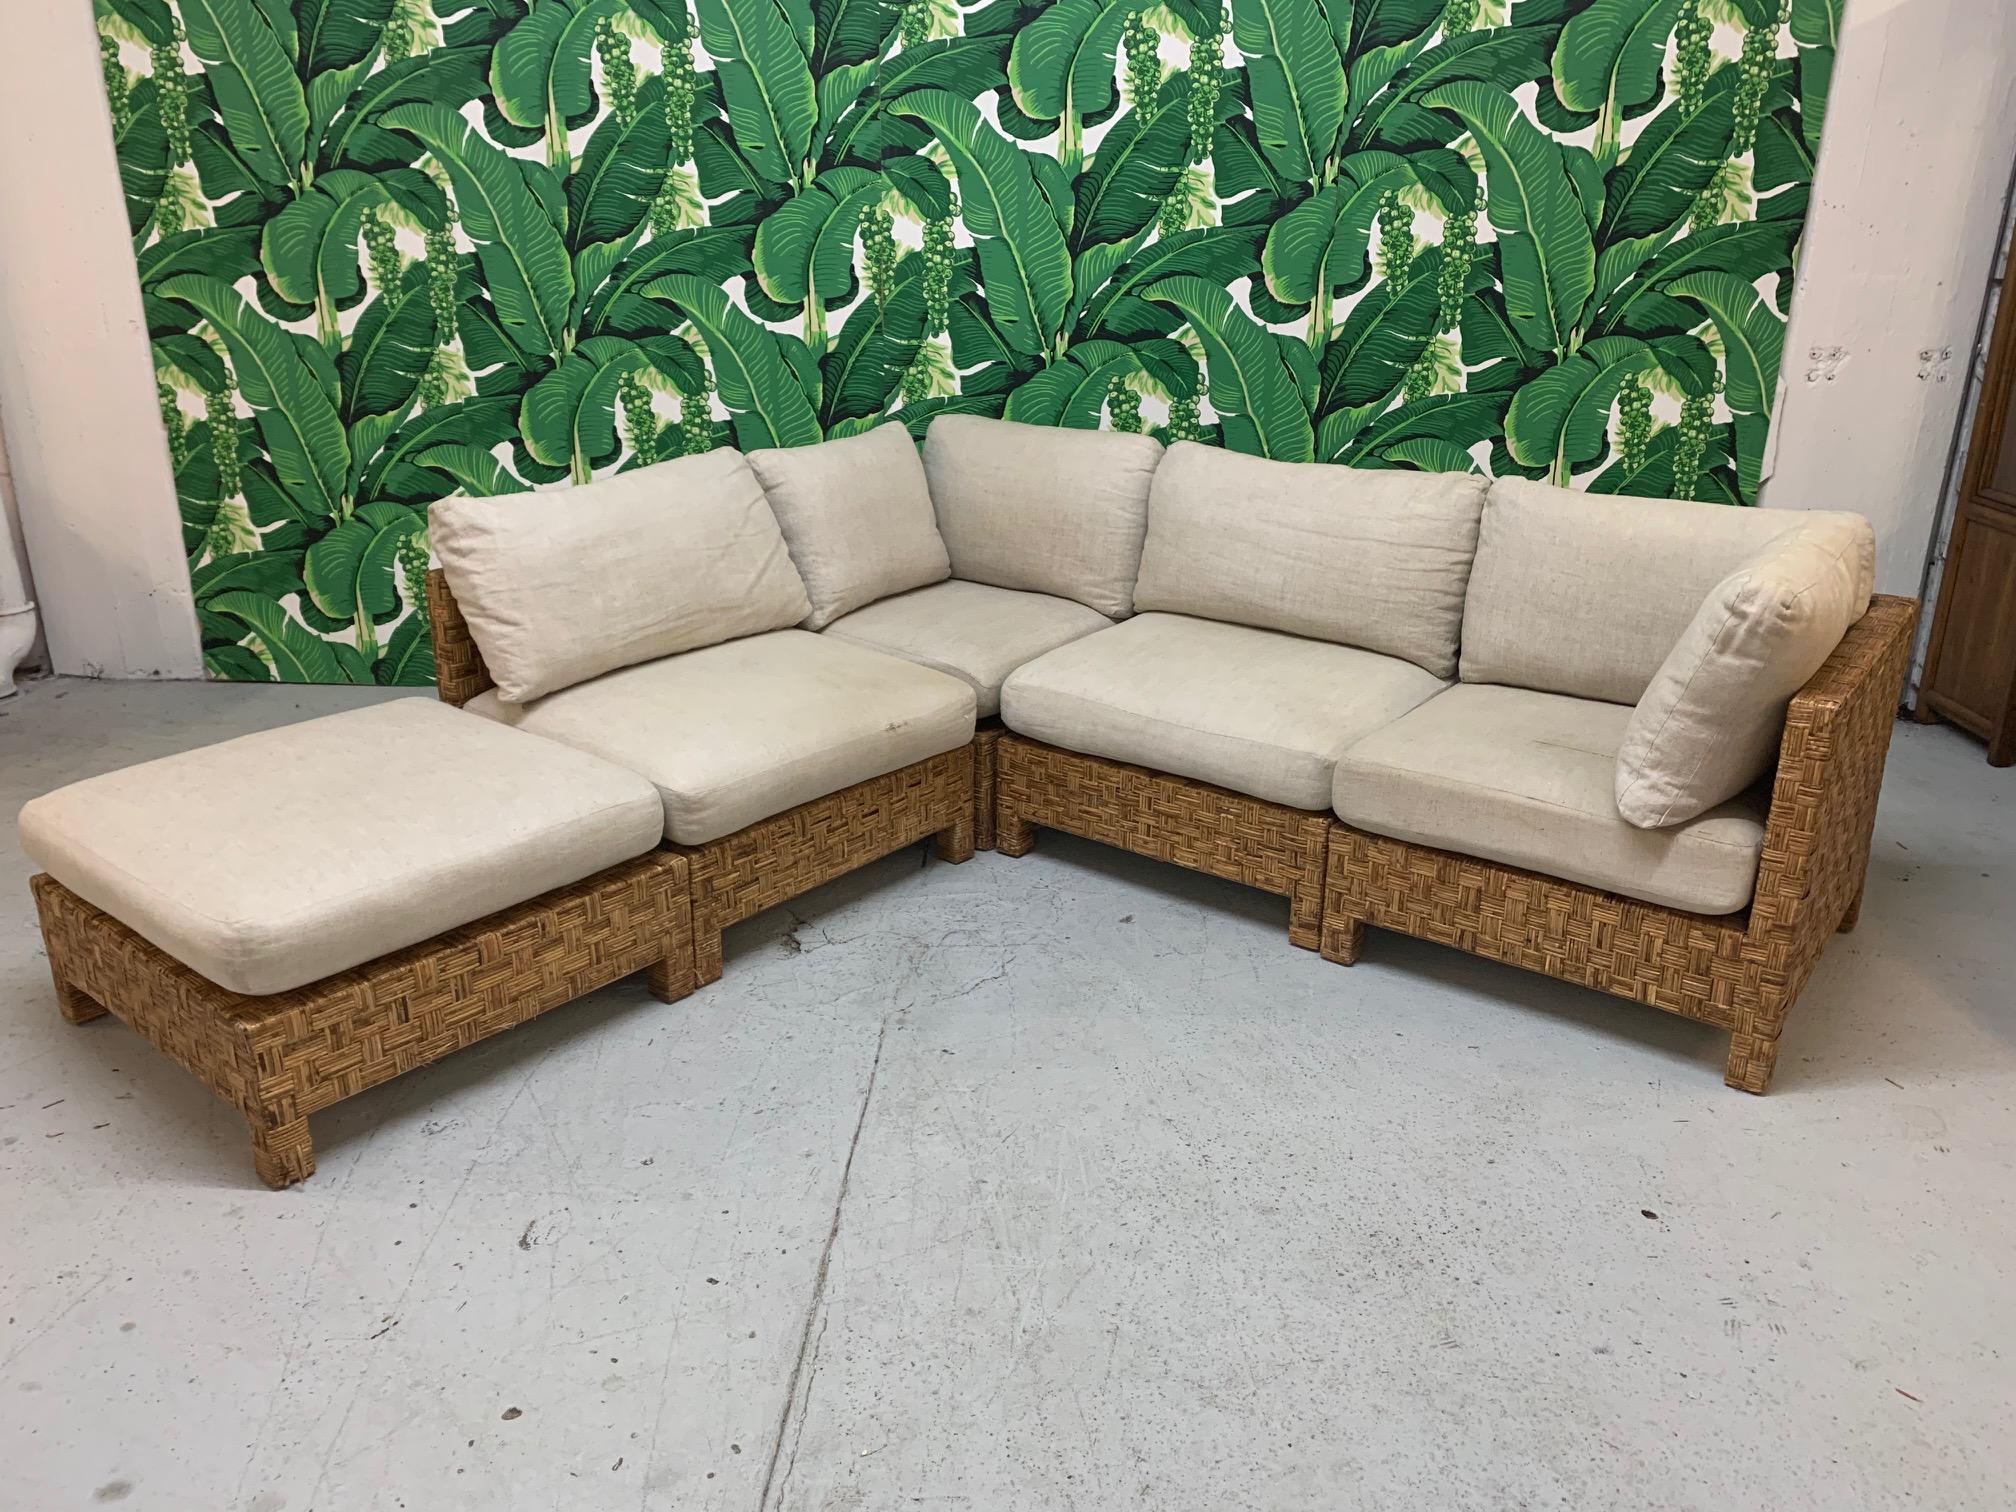 5-piece sectional sofa features woven block wicker design and modular pieces that can be arranged in several configurations. Design in the manner of John Hutton. Consists of 2 corner pieces, 2 side pieces, and an ottoman piece. Good vintage